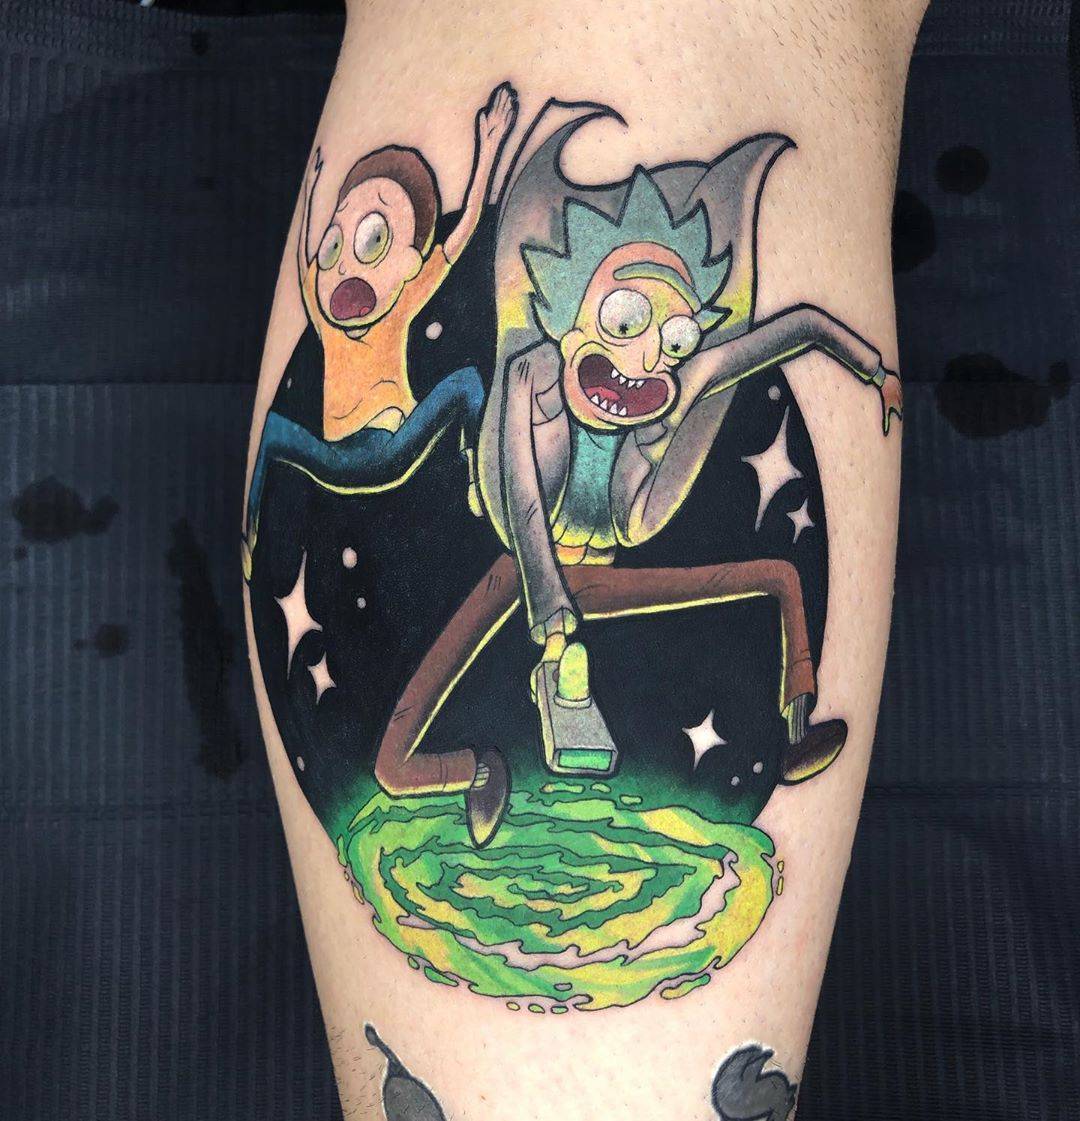 Rick and Morty tattoo on the upper arm